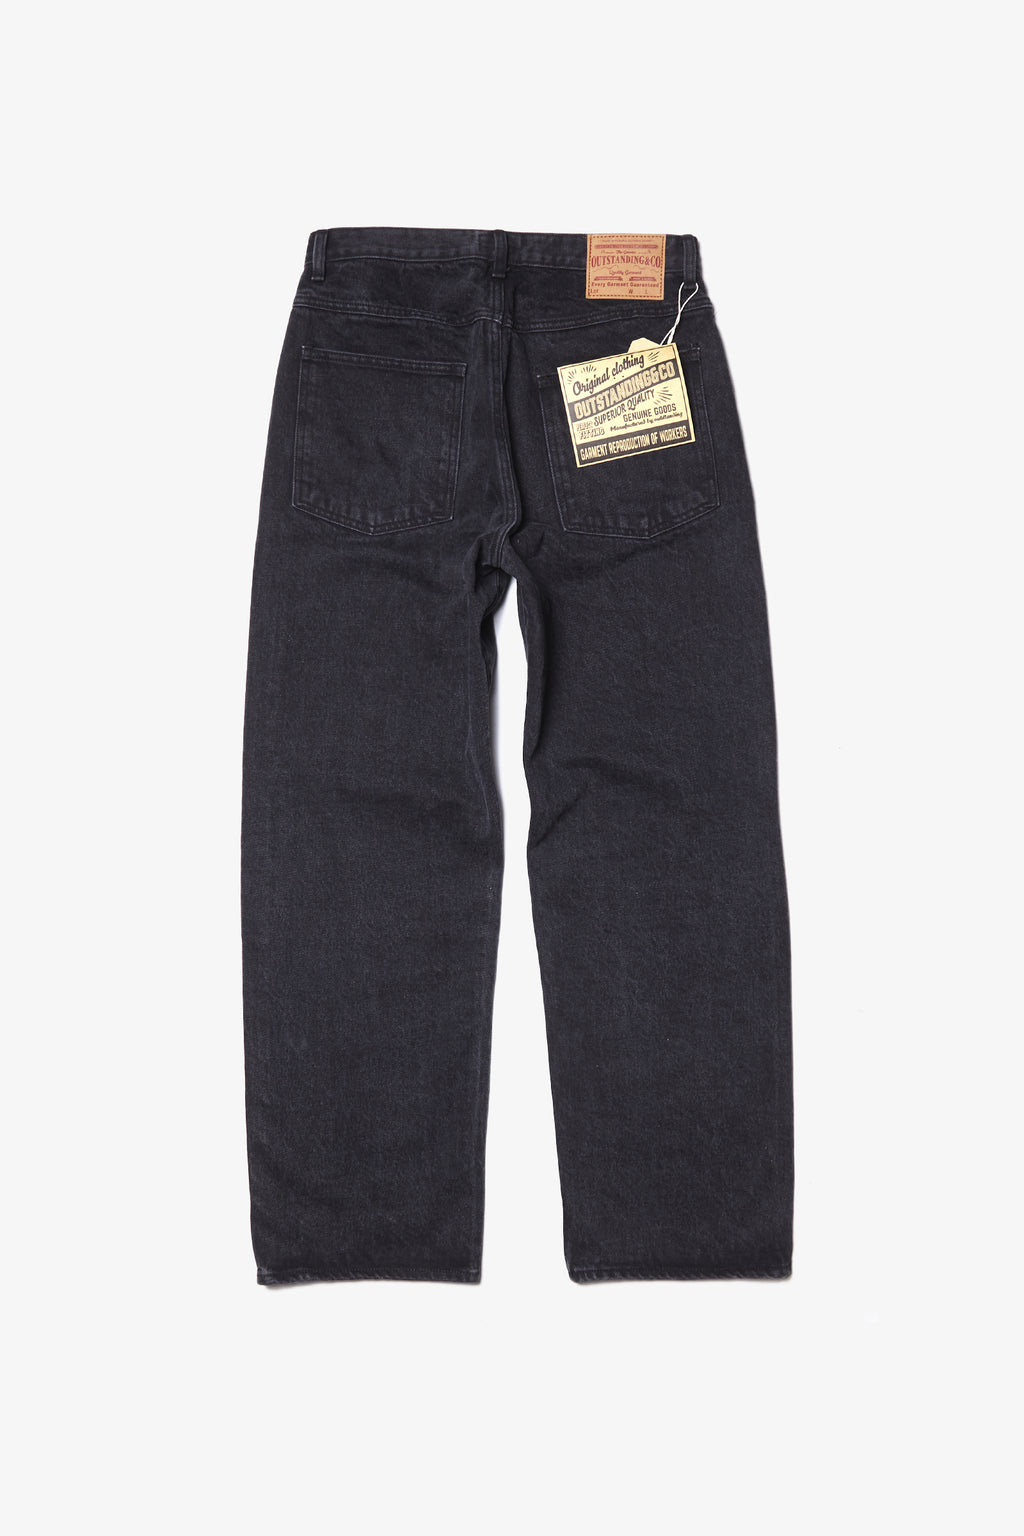 Outstanding & Co. - Wide Washed Jeans - Black